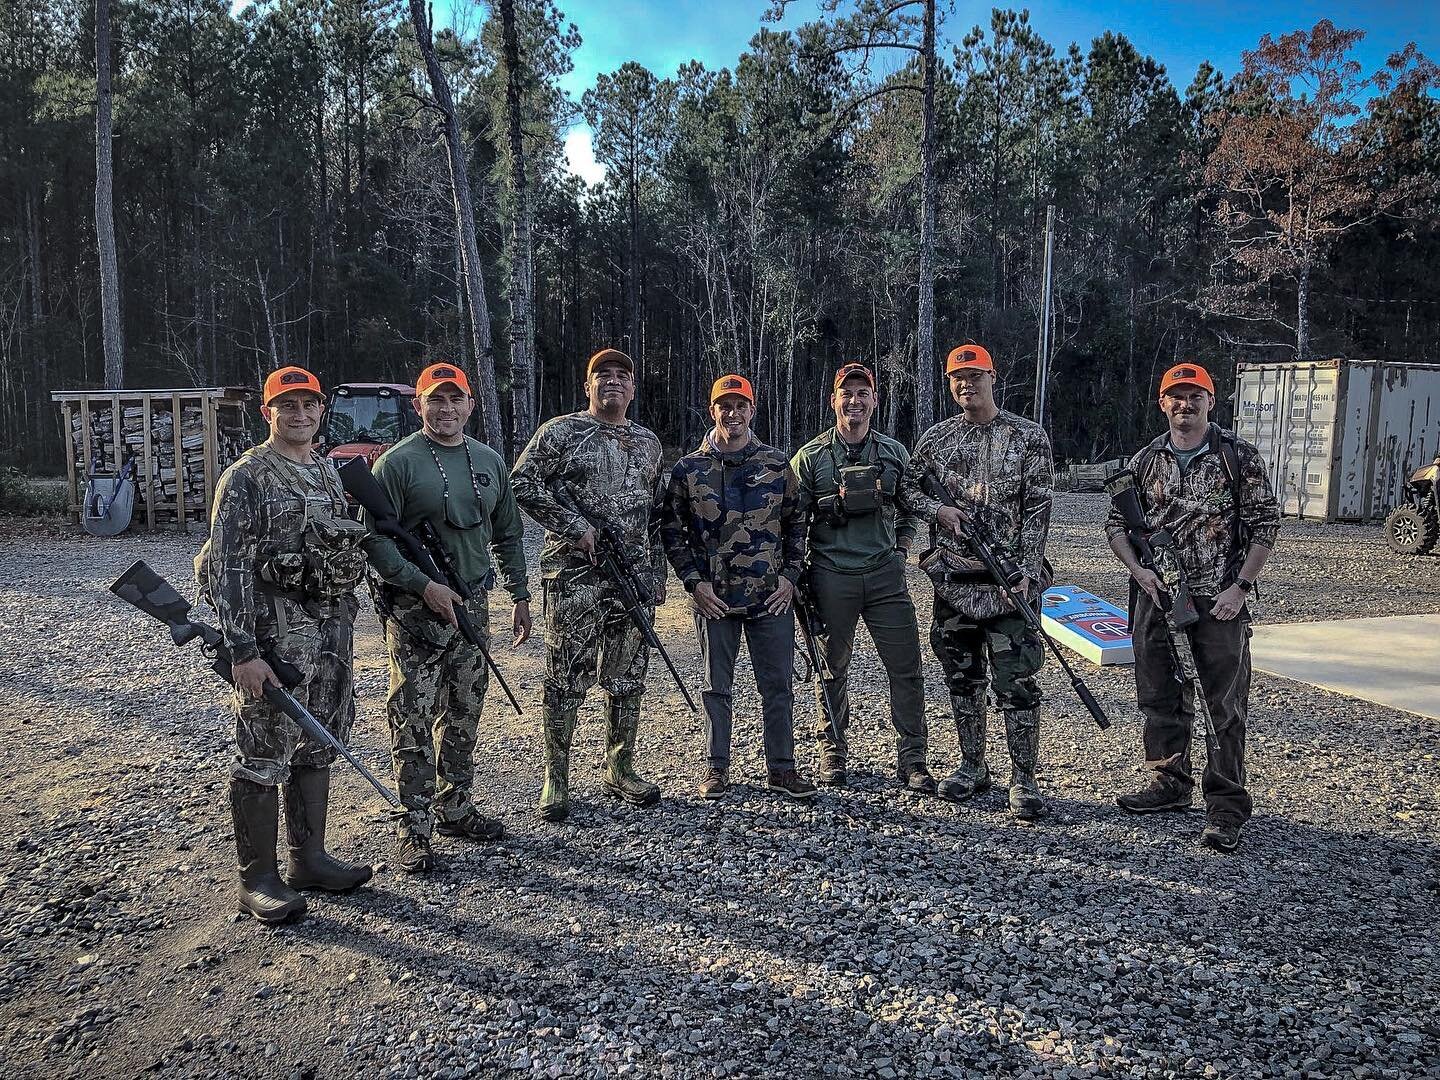 &ldquo;As iron sharpens iron, so one man sharpens another.&rdquo;
‭‭Proverbs‬ ‭27:17‬

Feeling grateful, humbled, and inspired. Awesome weekend out with some of our leaders trying to take advantage of the last month of deer season here in NC.

We wer